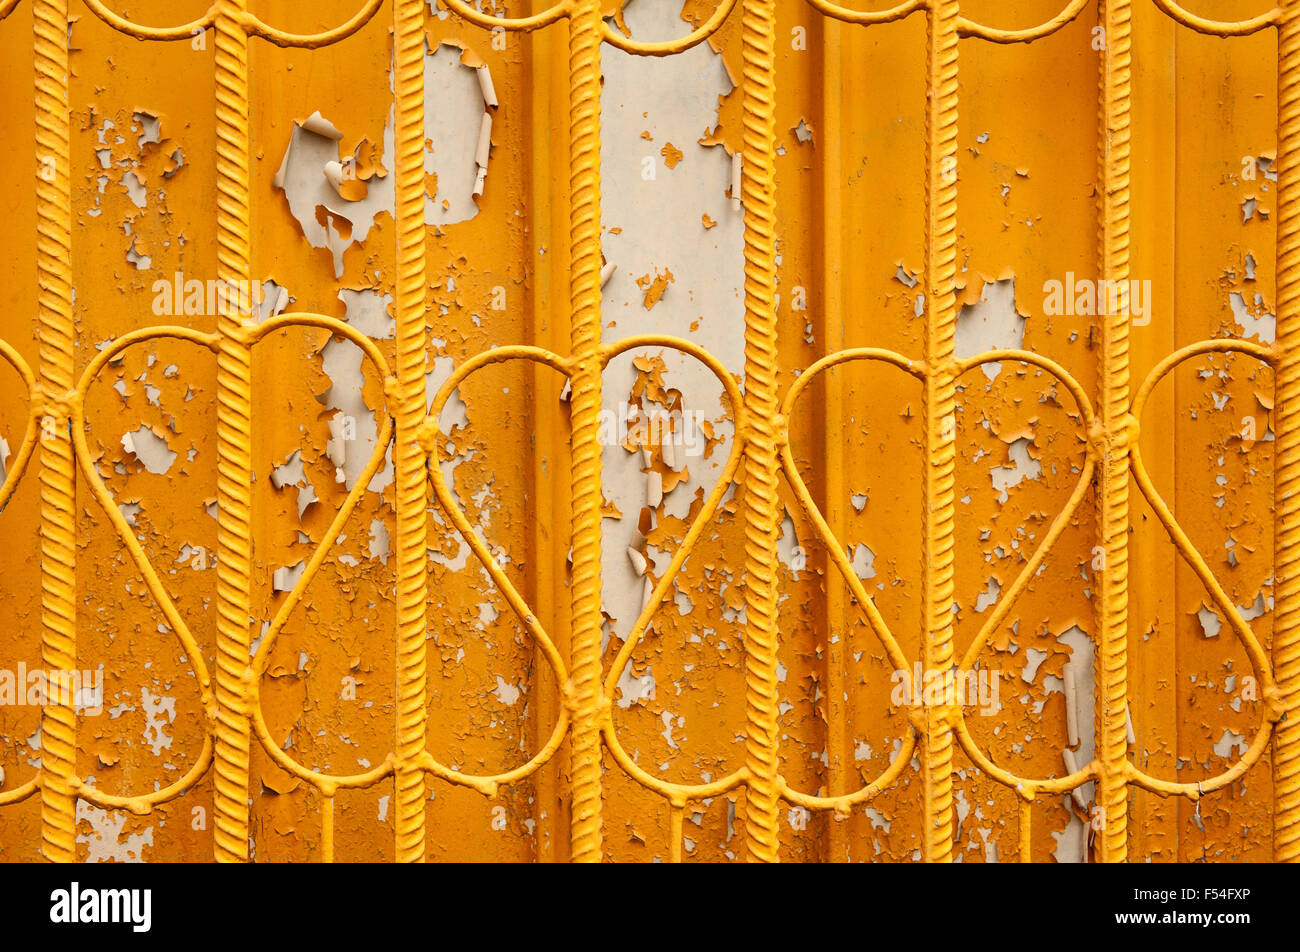 Rod metal yellow fence surface abstract, decorative old fence with hearts like shaped wires and weathered orange color paint ... Stock Photo